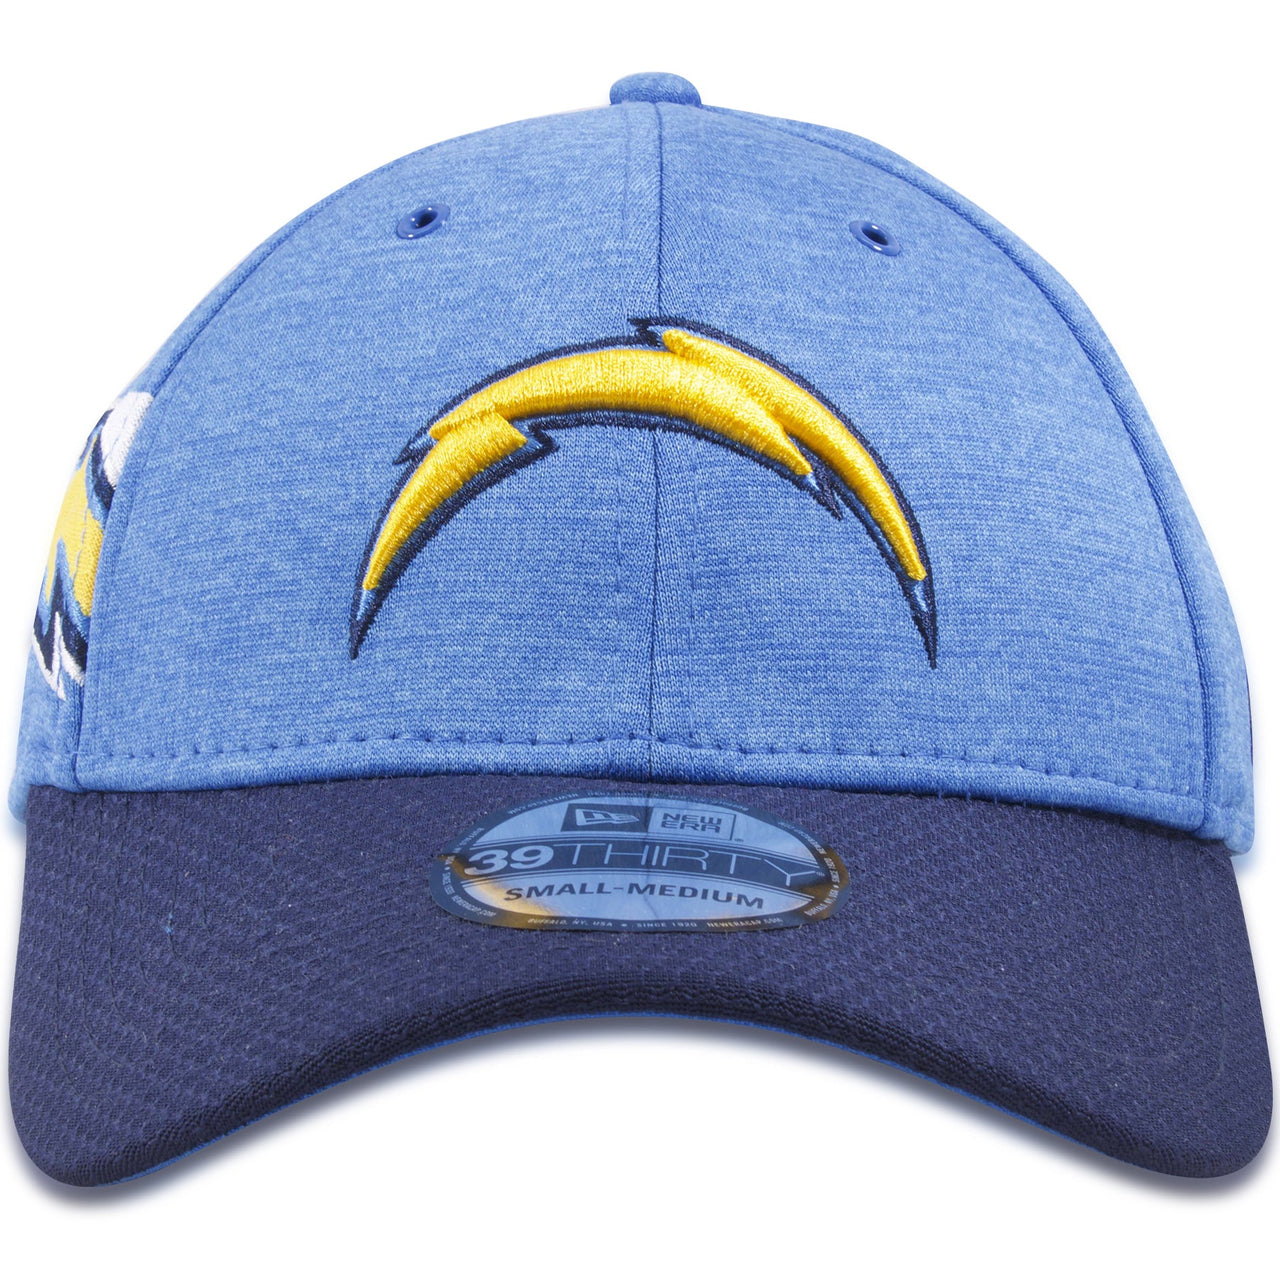 Los Angeles Chargers 39Thirty On Field Sideline Home Flexfit Cap